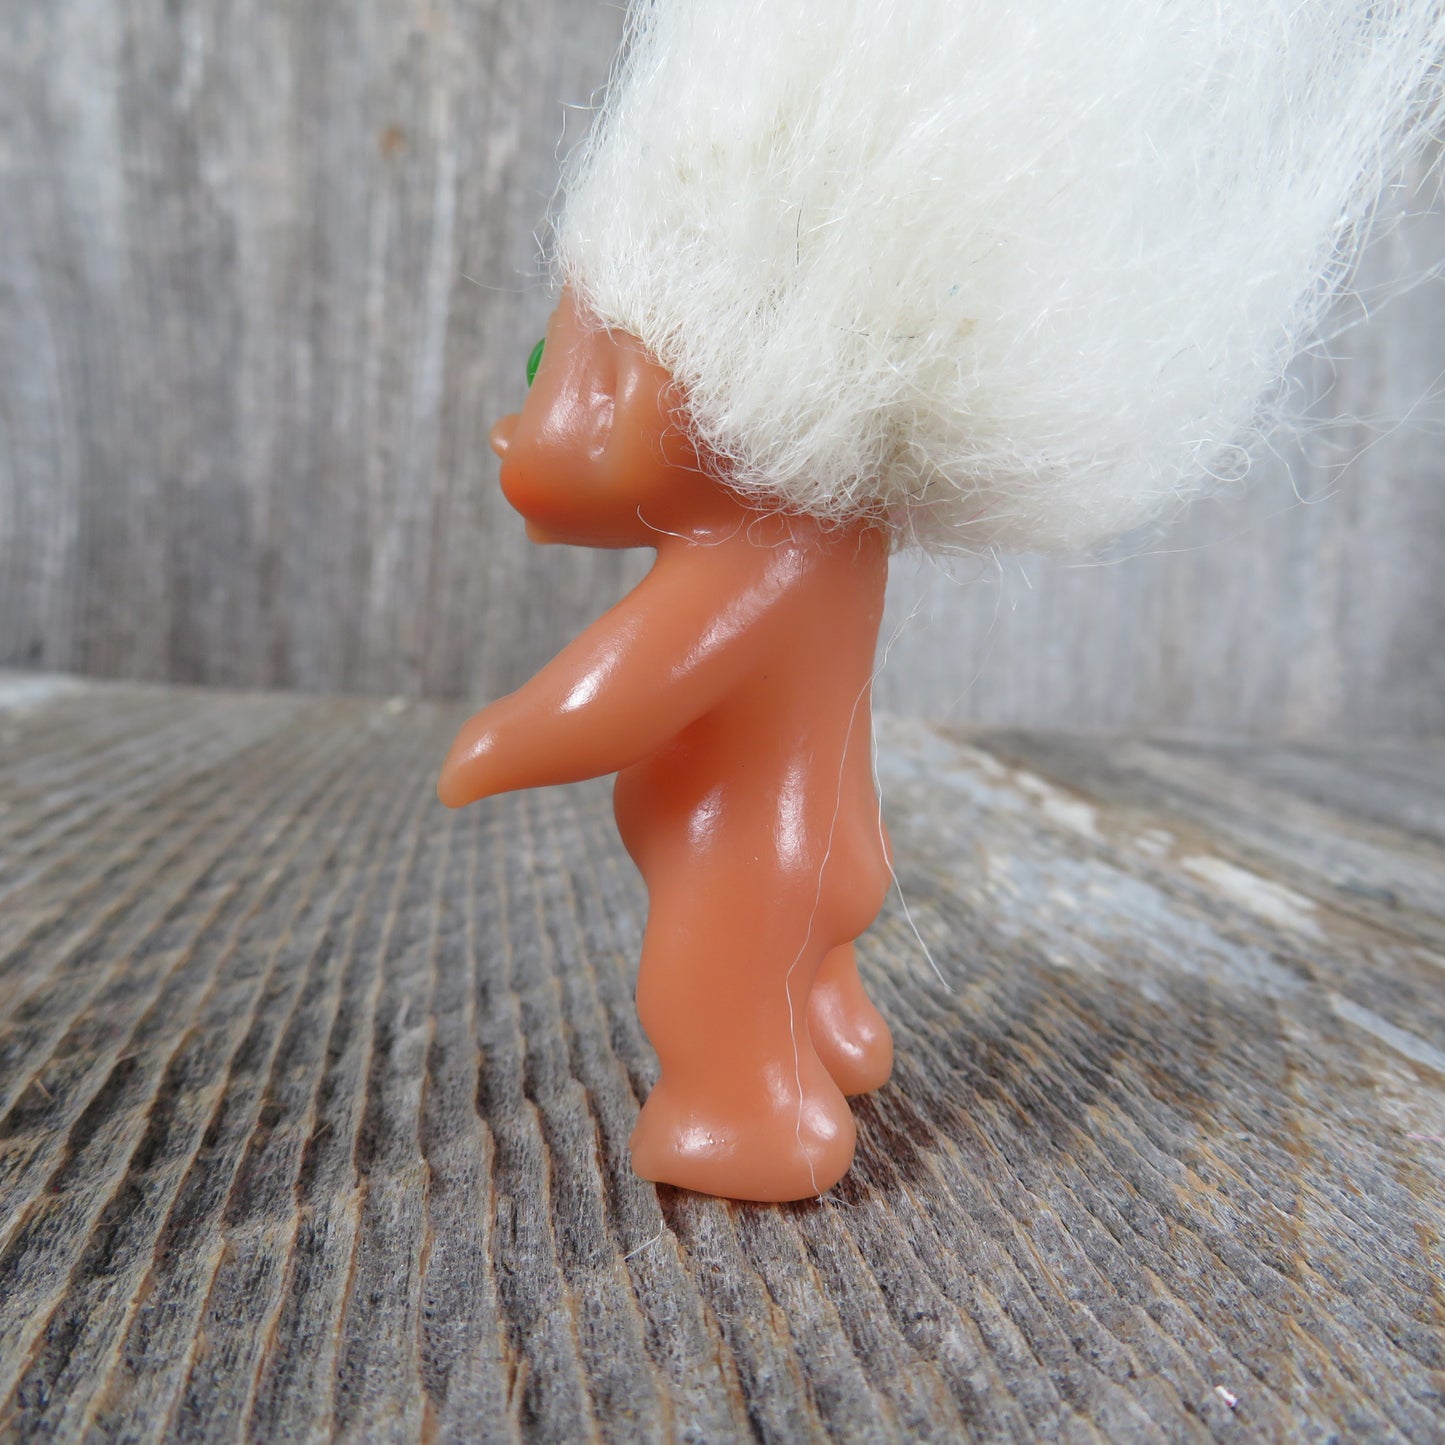 Vintage Baby Troll Doll White Hair Toddler Green Eyes Dam Norfin Naked 2.5 inches 1983 - At Grandma's Table